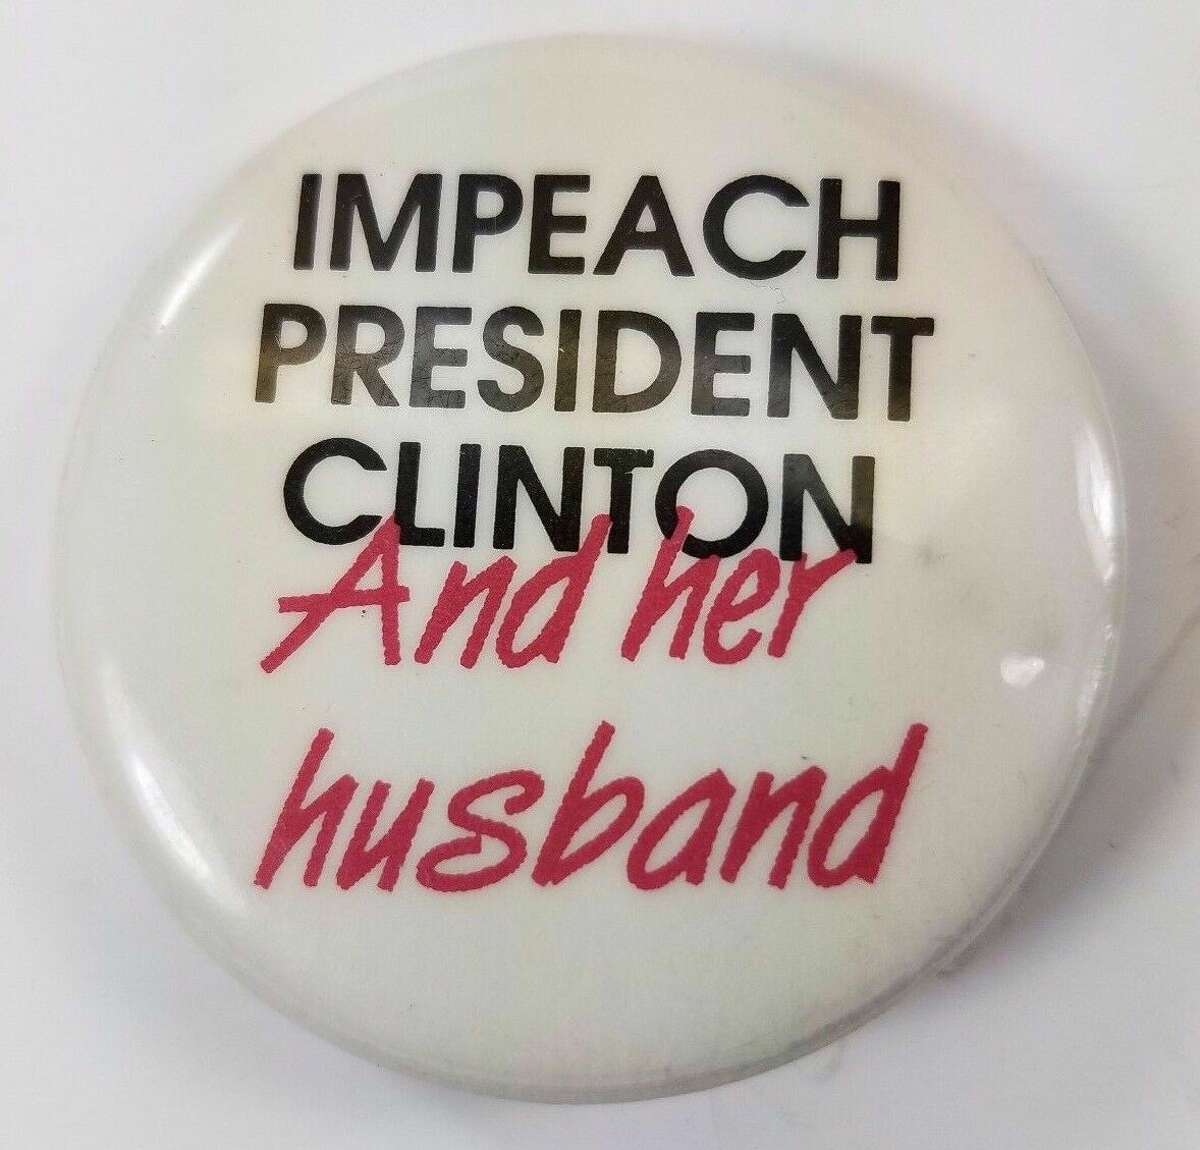 This button suggests that both Clintons should be impeached, long before Hillary was a presidential contender.